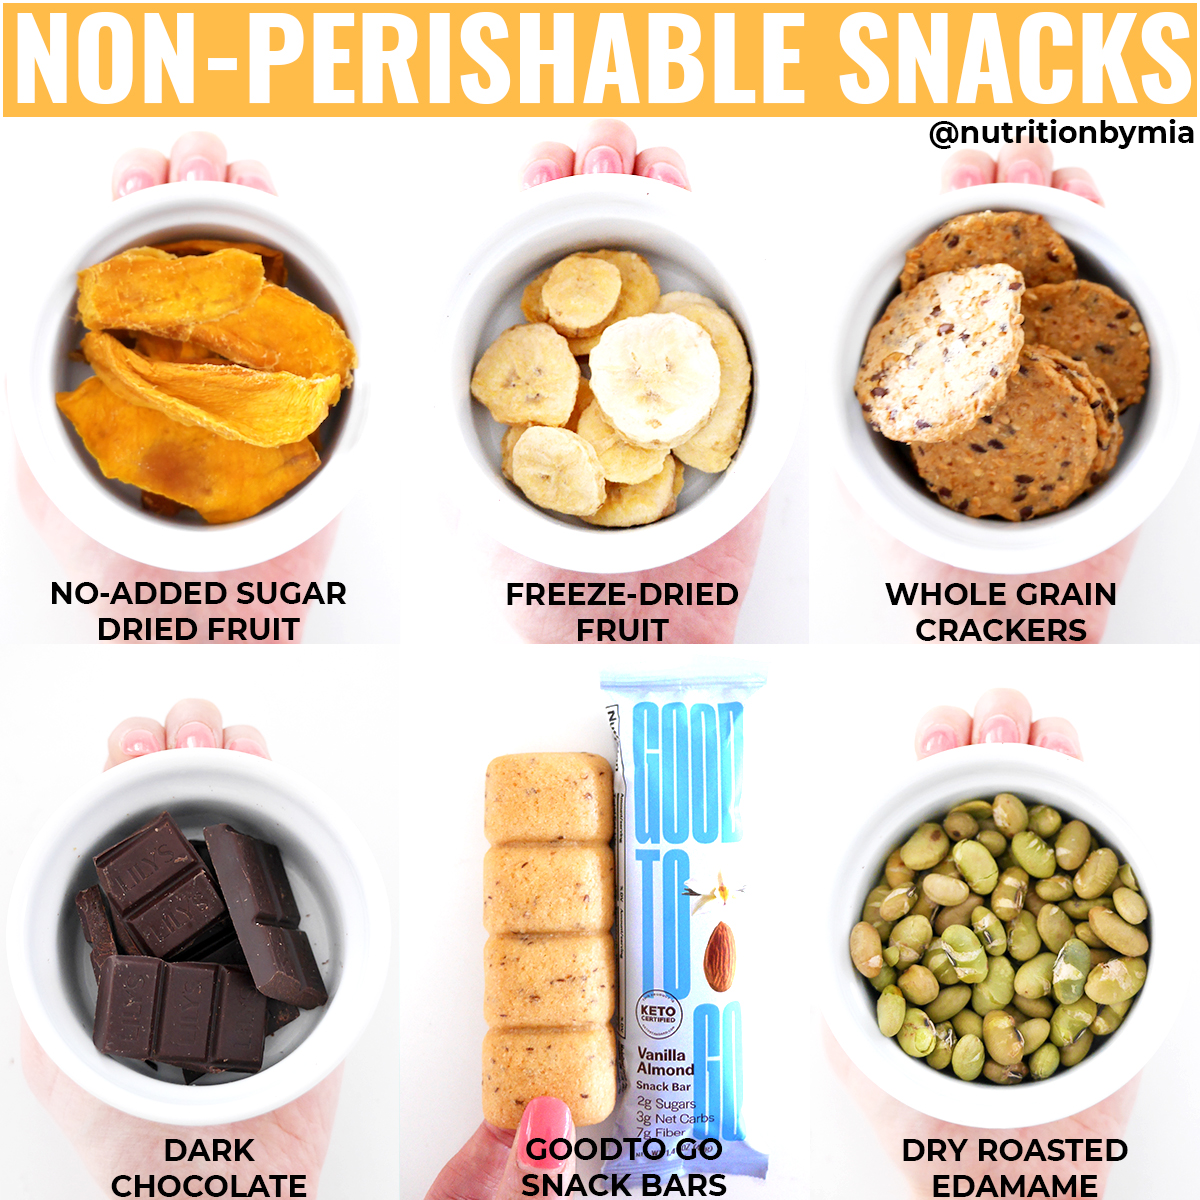 Twitter 上的 Mia Syn, MS, RDN："Nutritious non-perishable snack round-up✨Satisfy your sweet + savory cravings options like freeze-fried fruit chips, roasted seaweed & @goodtogosnacks keto-friendly s oft-baked vegan, GF Vanilla Almond Snack Bars. #